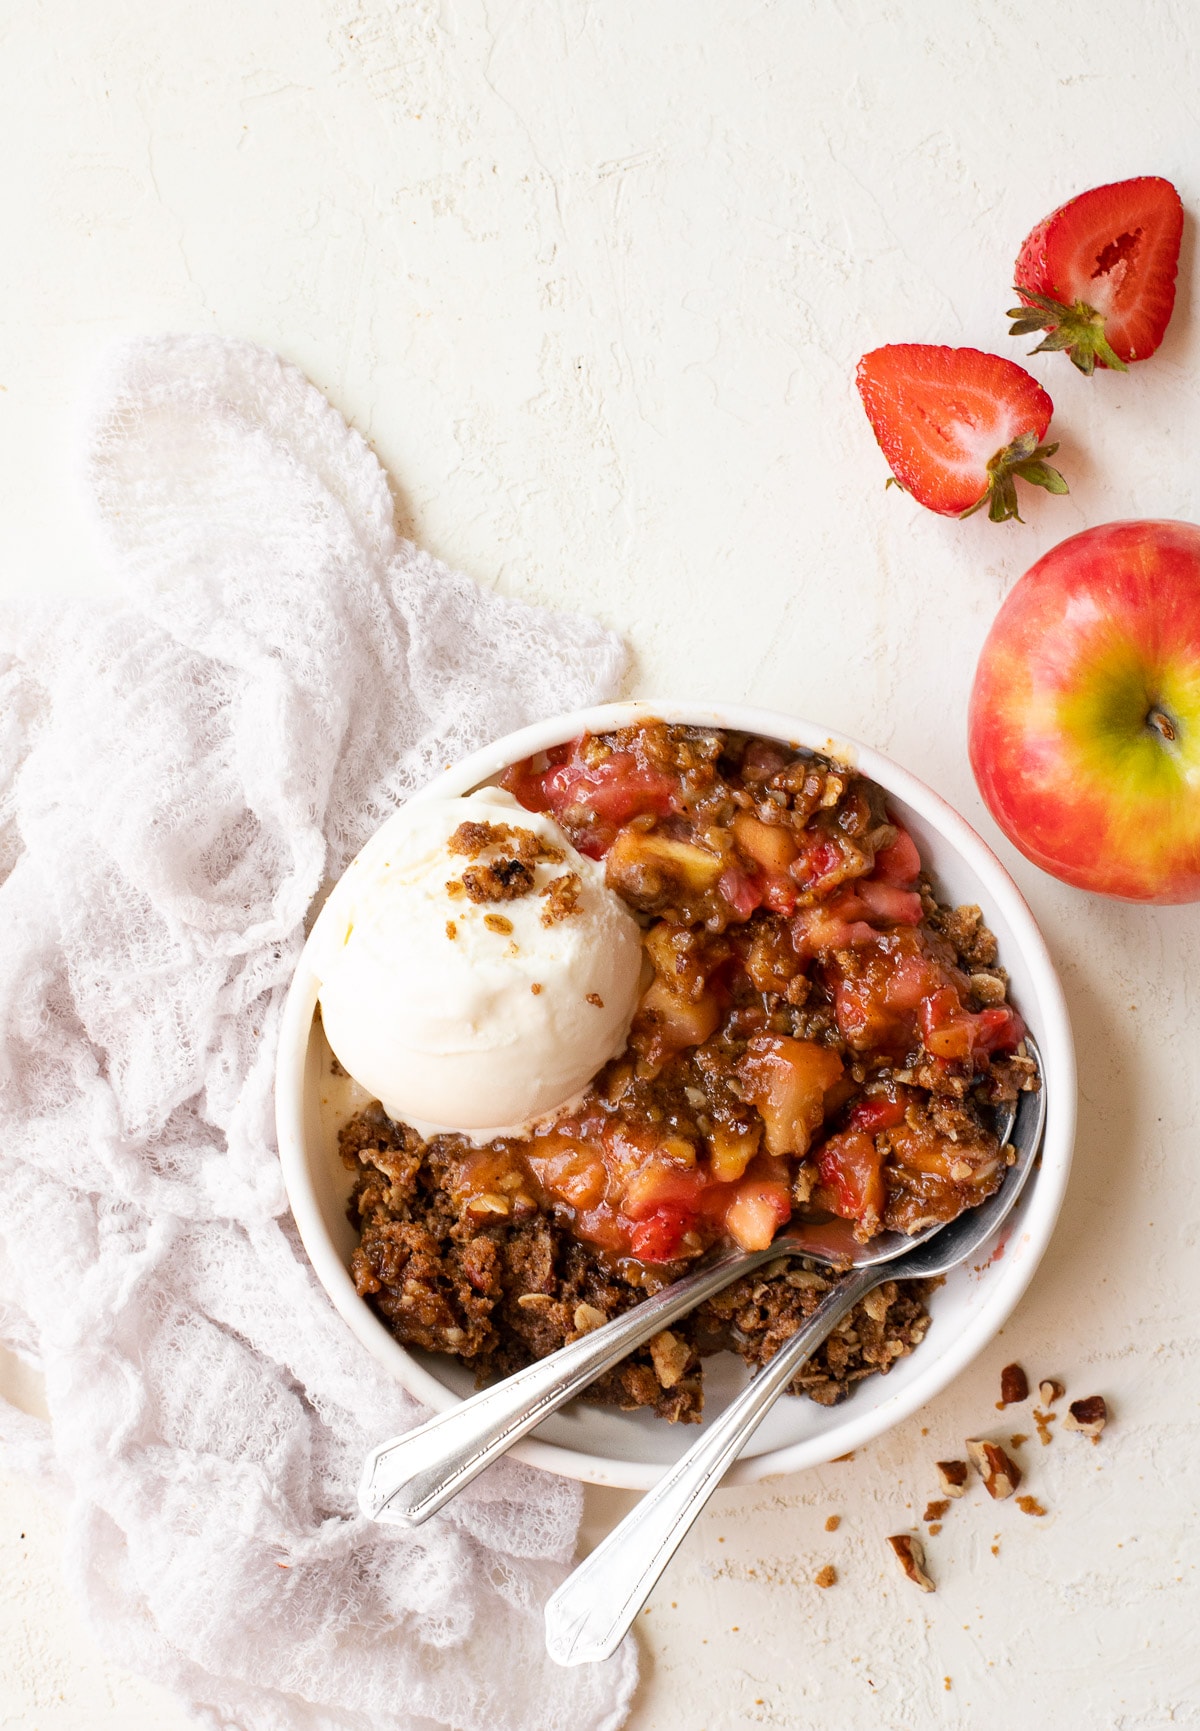 A serving of strawberry apple crumble on a plate with a scoop of ice cream and two spoons.